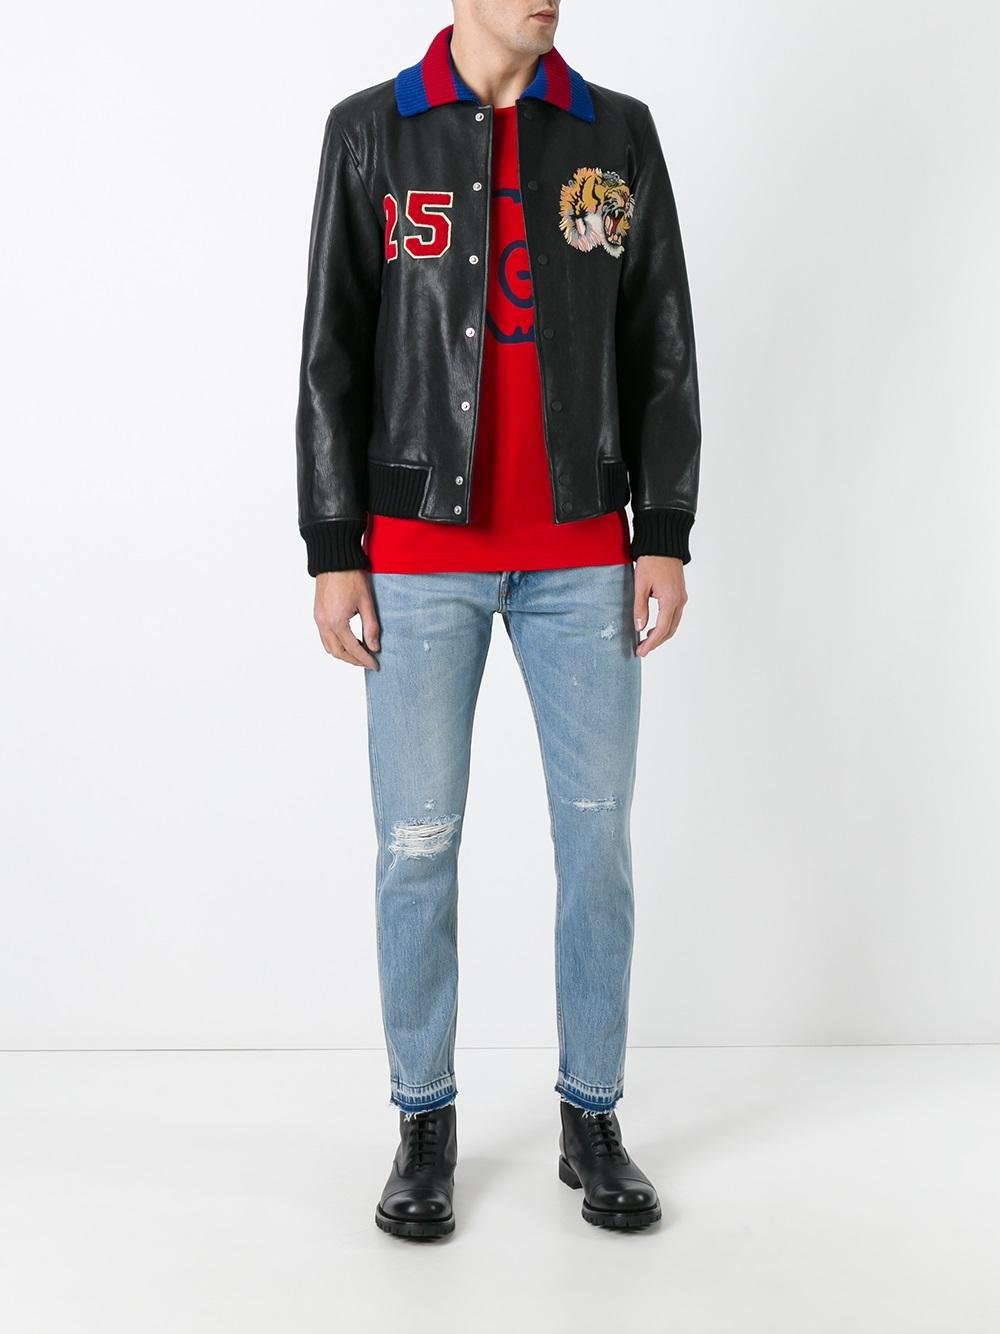 Gucci Leather Tiger Embroidered Bomber Jacket in Black for Men -